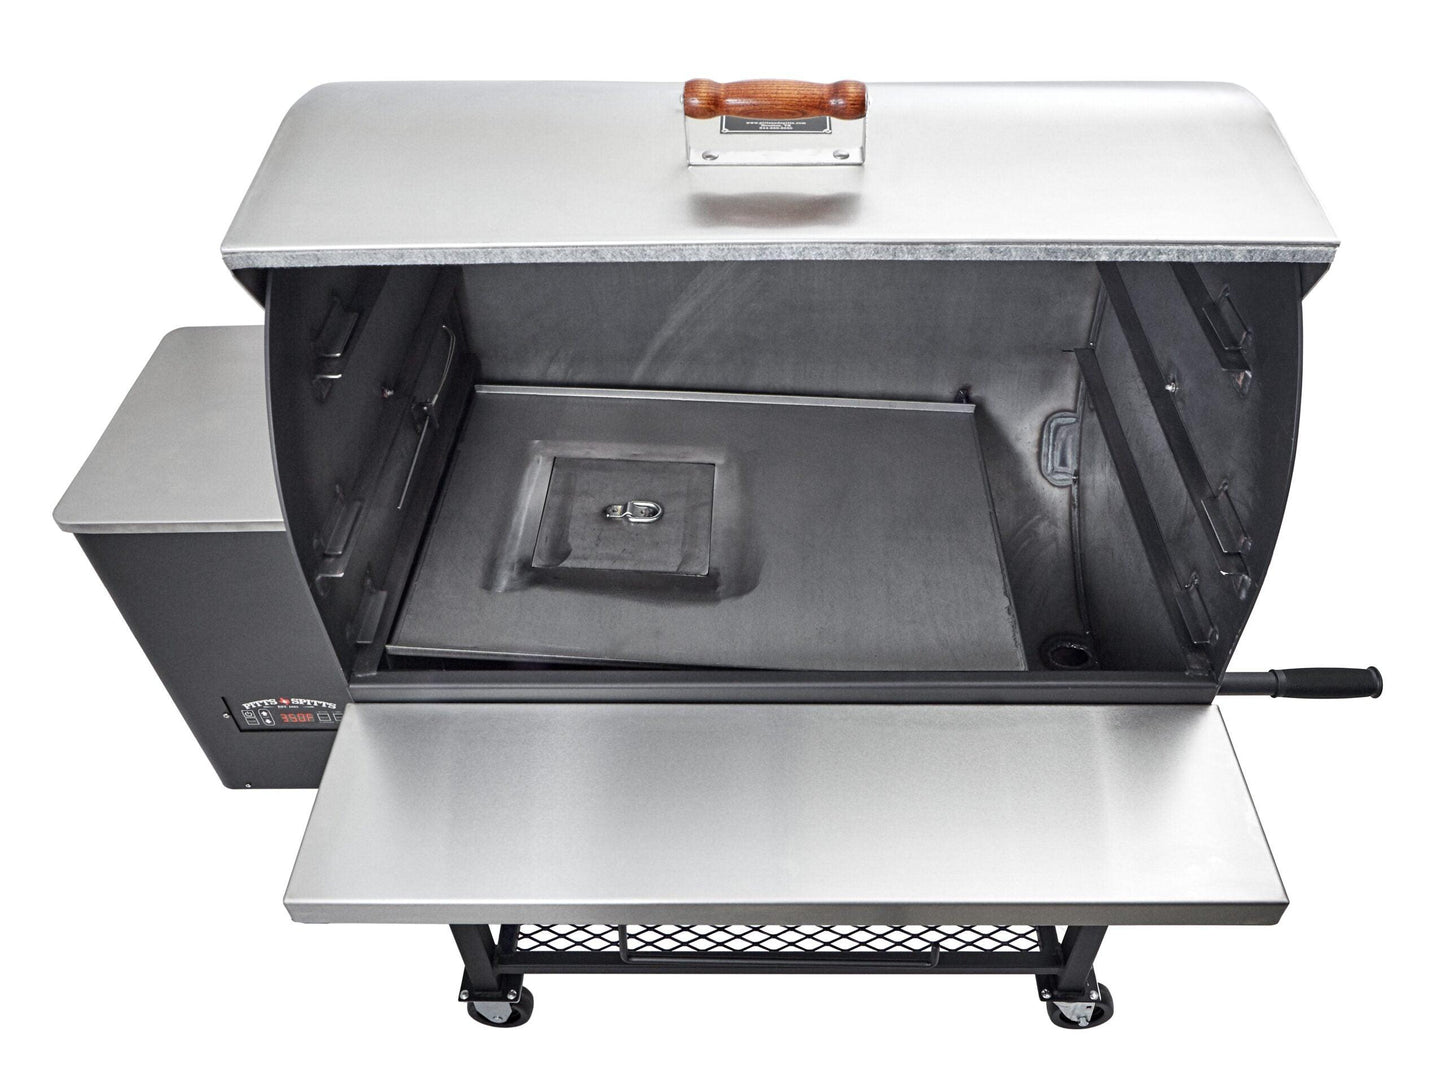 Pitts & Spitts Maverick 2000 Pellet Grill Pitts & Spitts Indigo Pool Patio BBQ